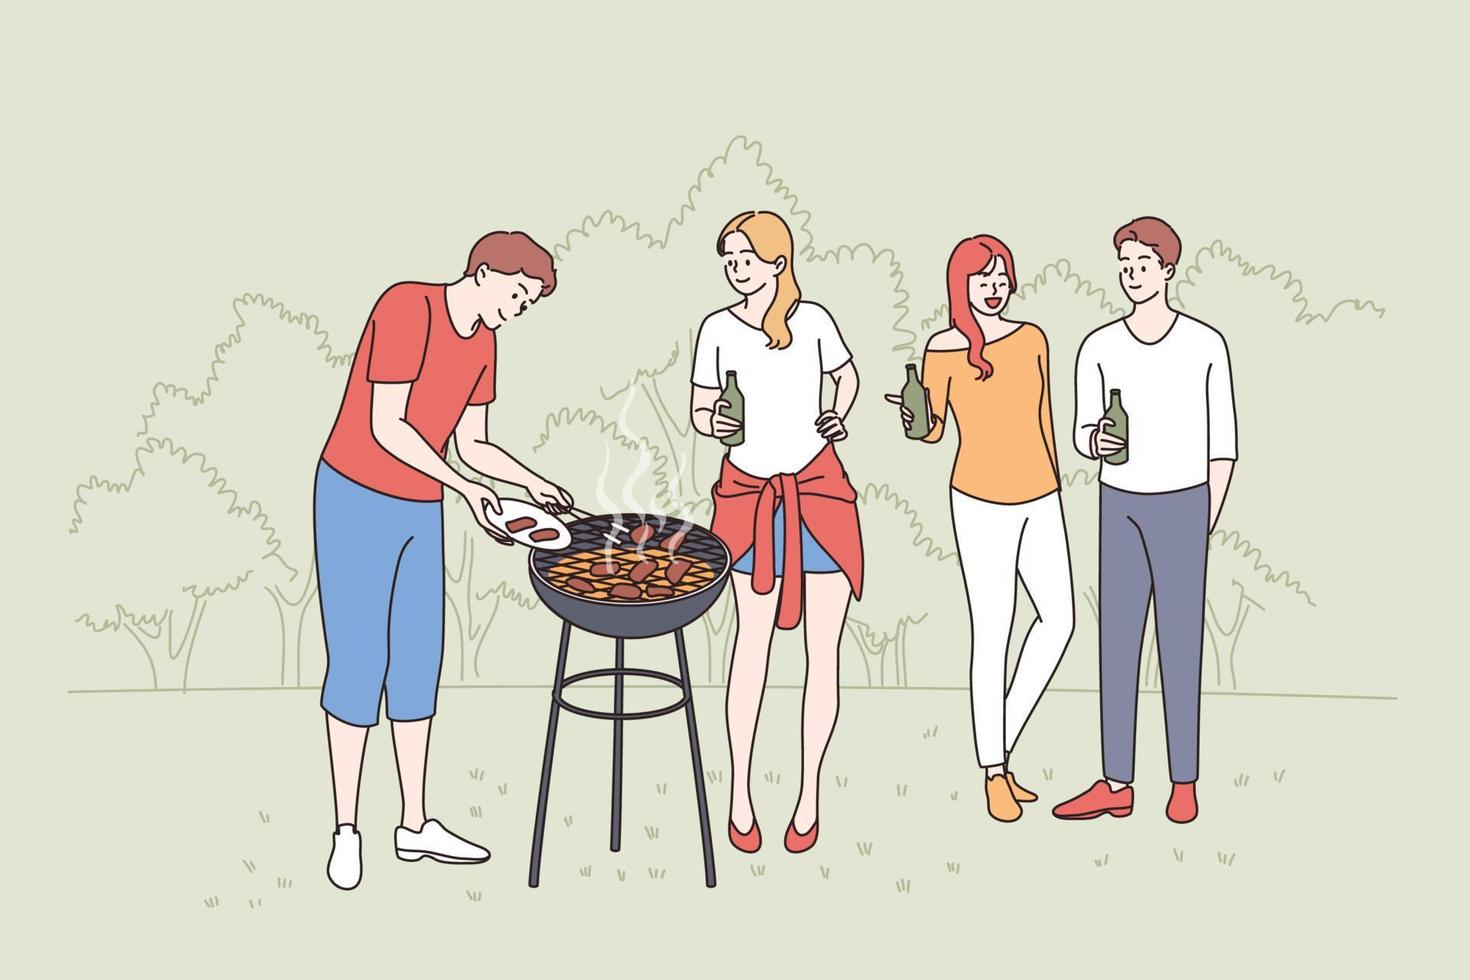 Having picnic and barbecue concept. Group of young happy smiling friends people standing chatting having bbq party with drinks outdoors on nature vector illustration